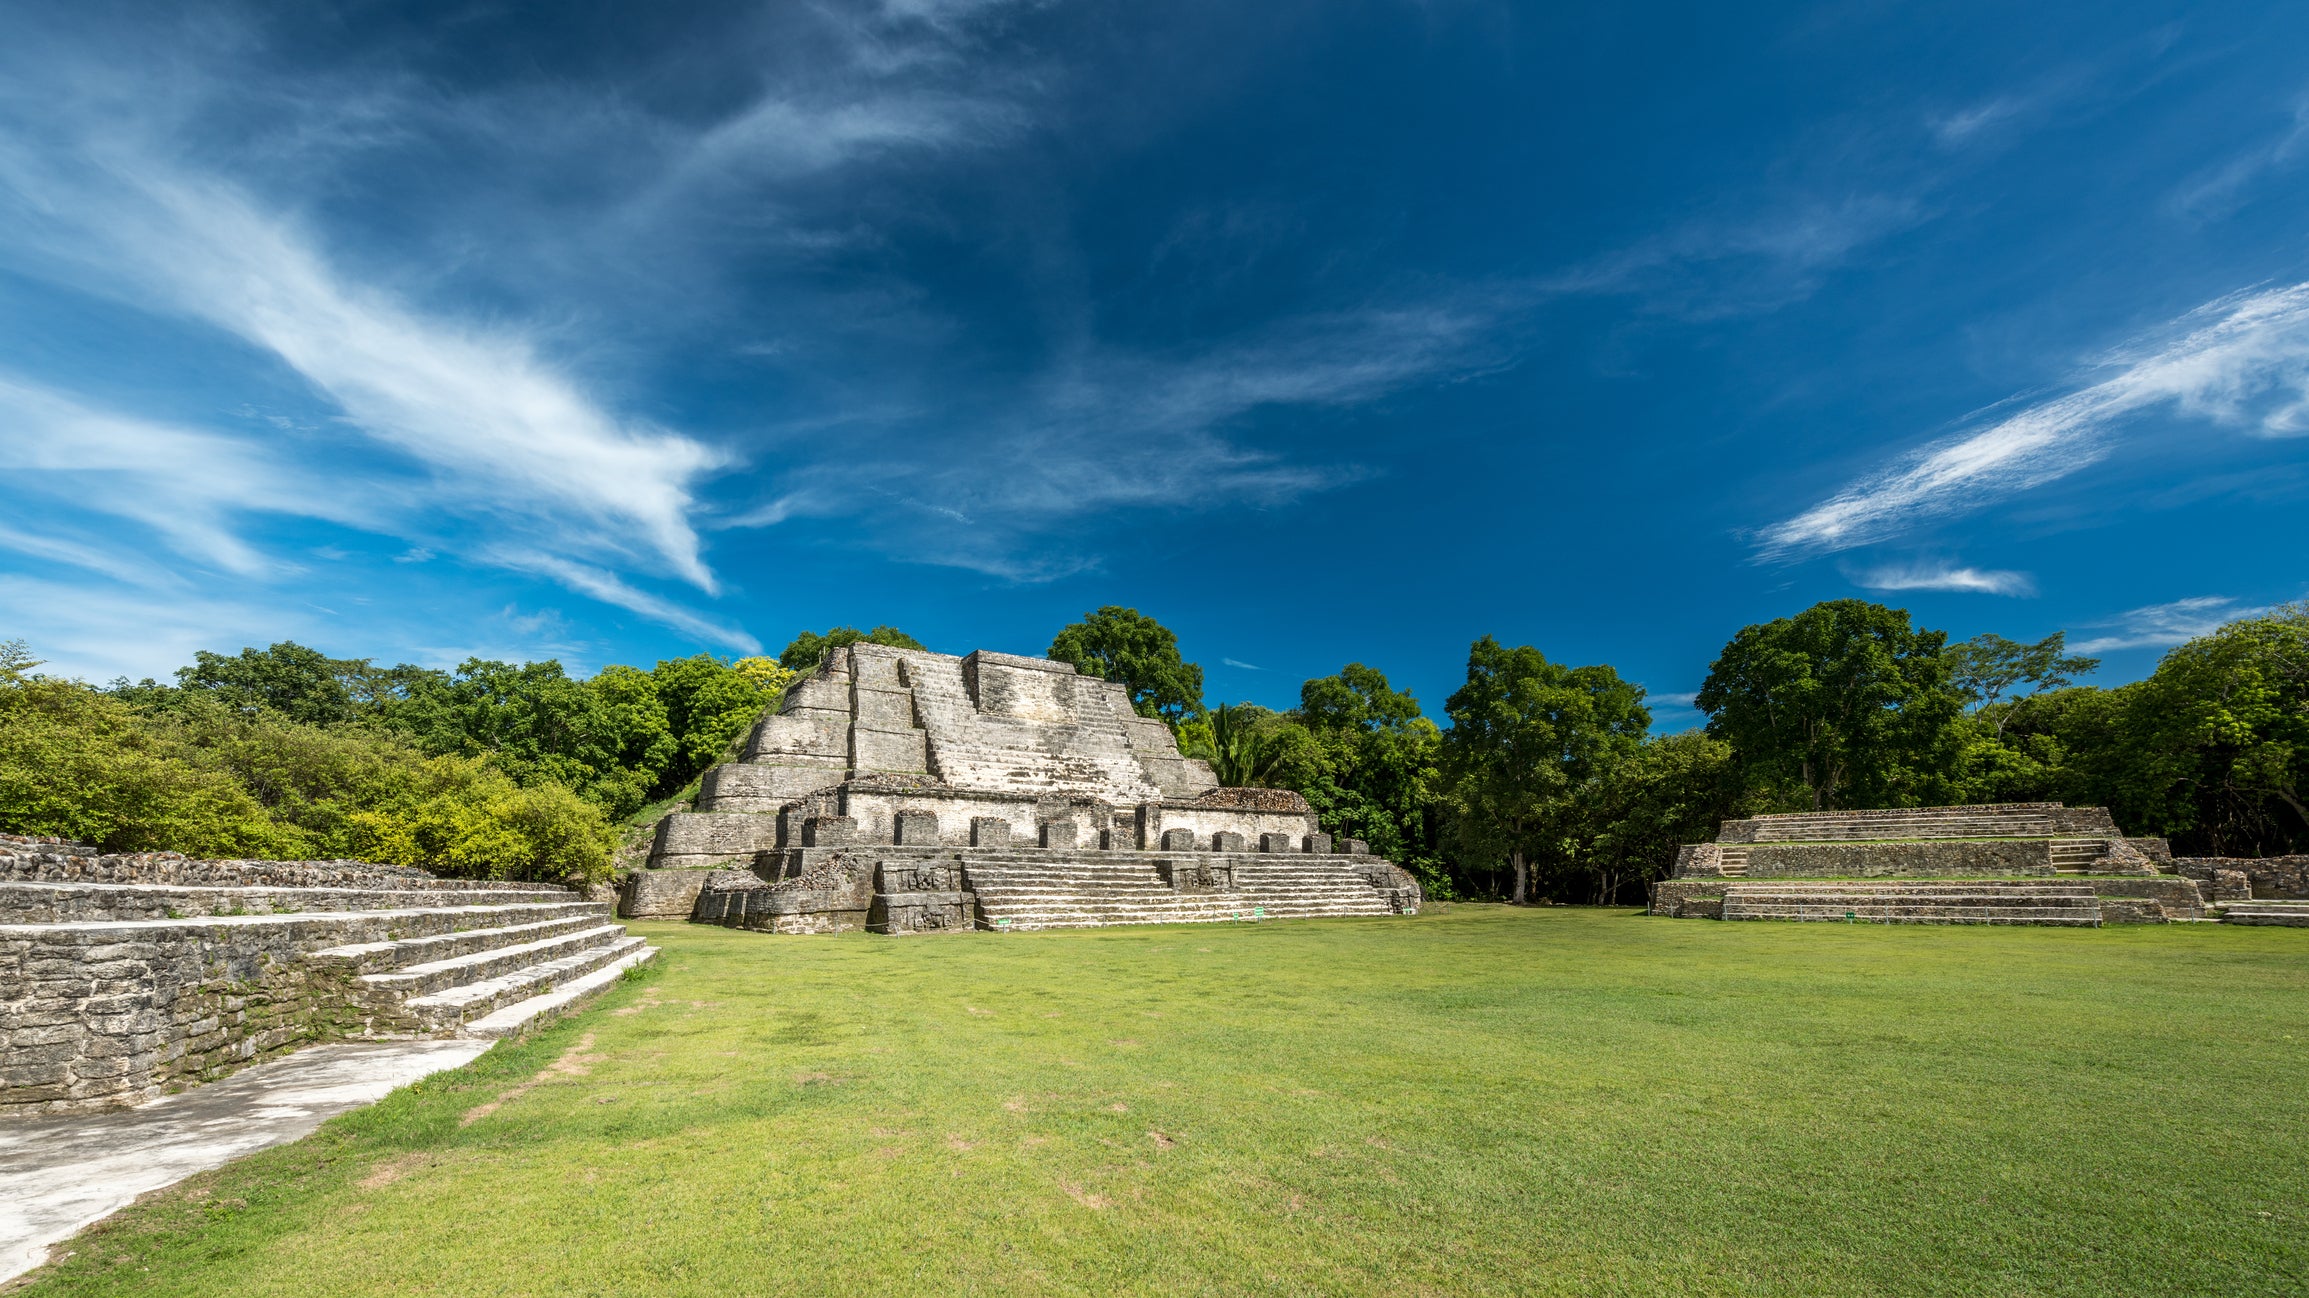 The Temple of the Sun God in Belize City